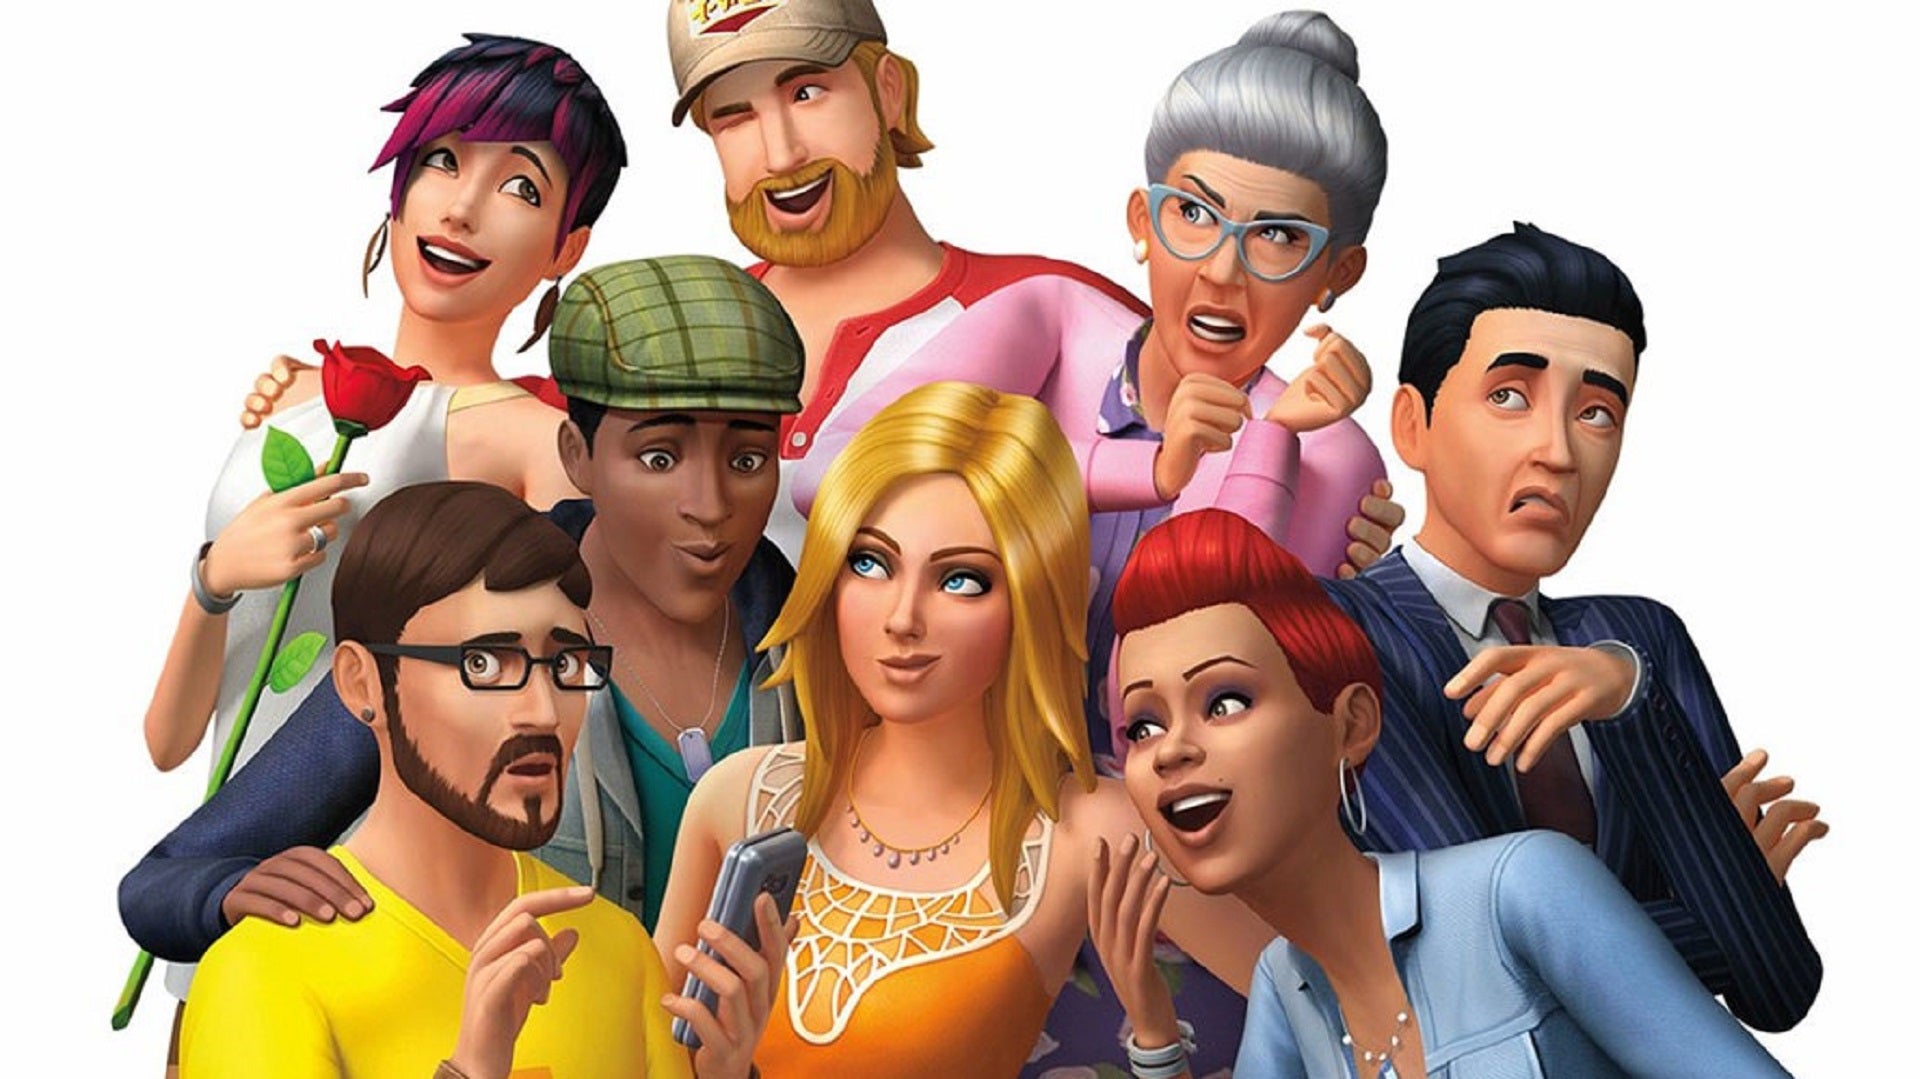 A group of Sims, from the original box art of The Sims 4.